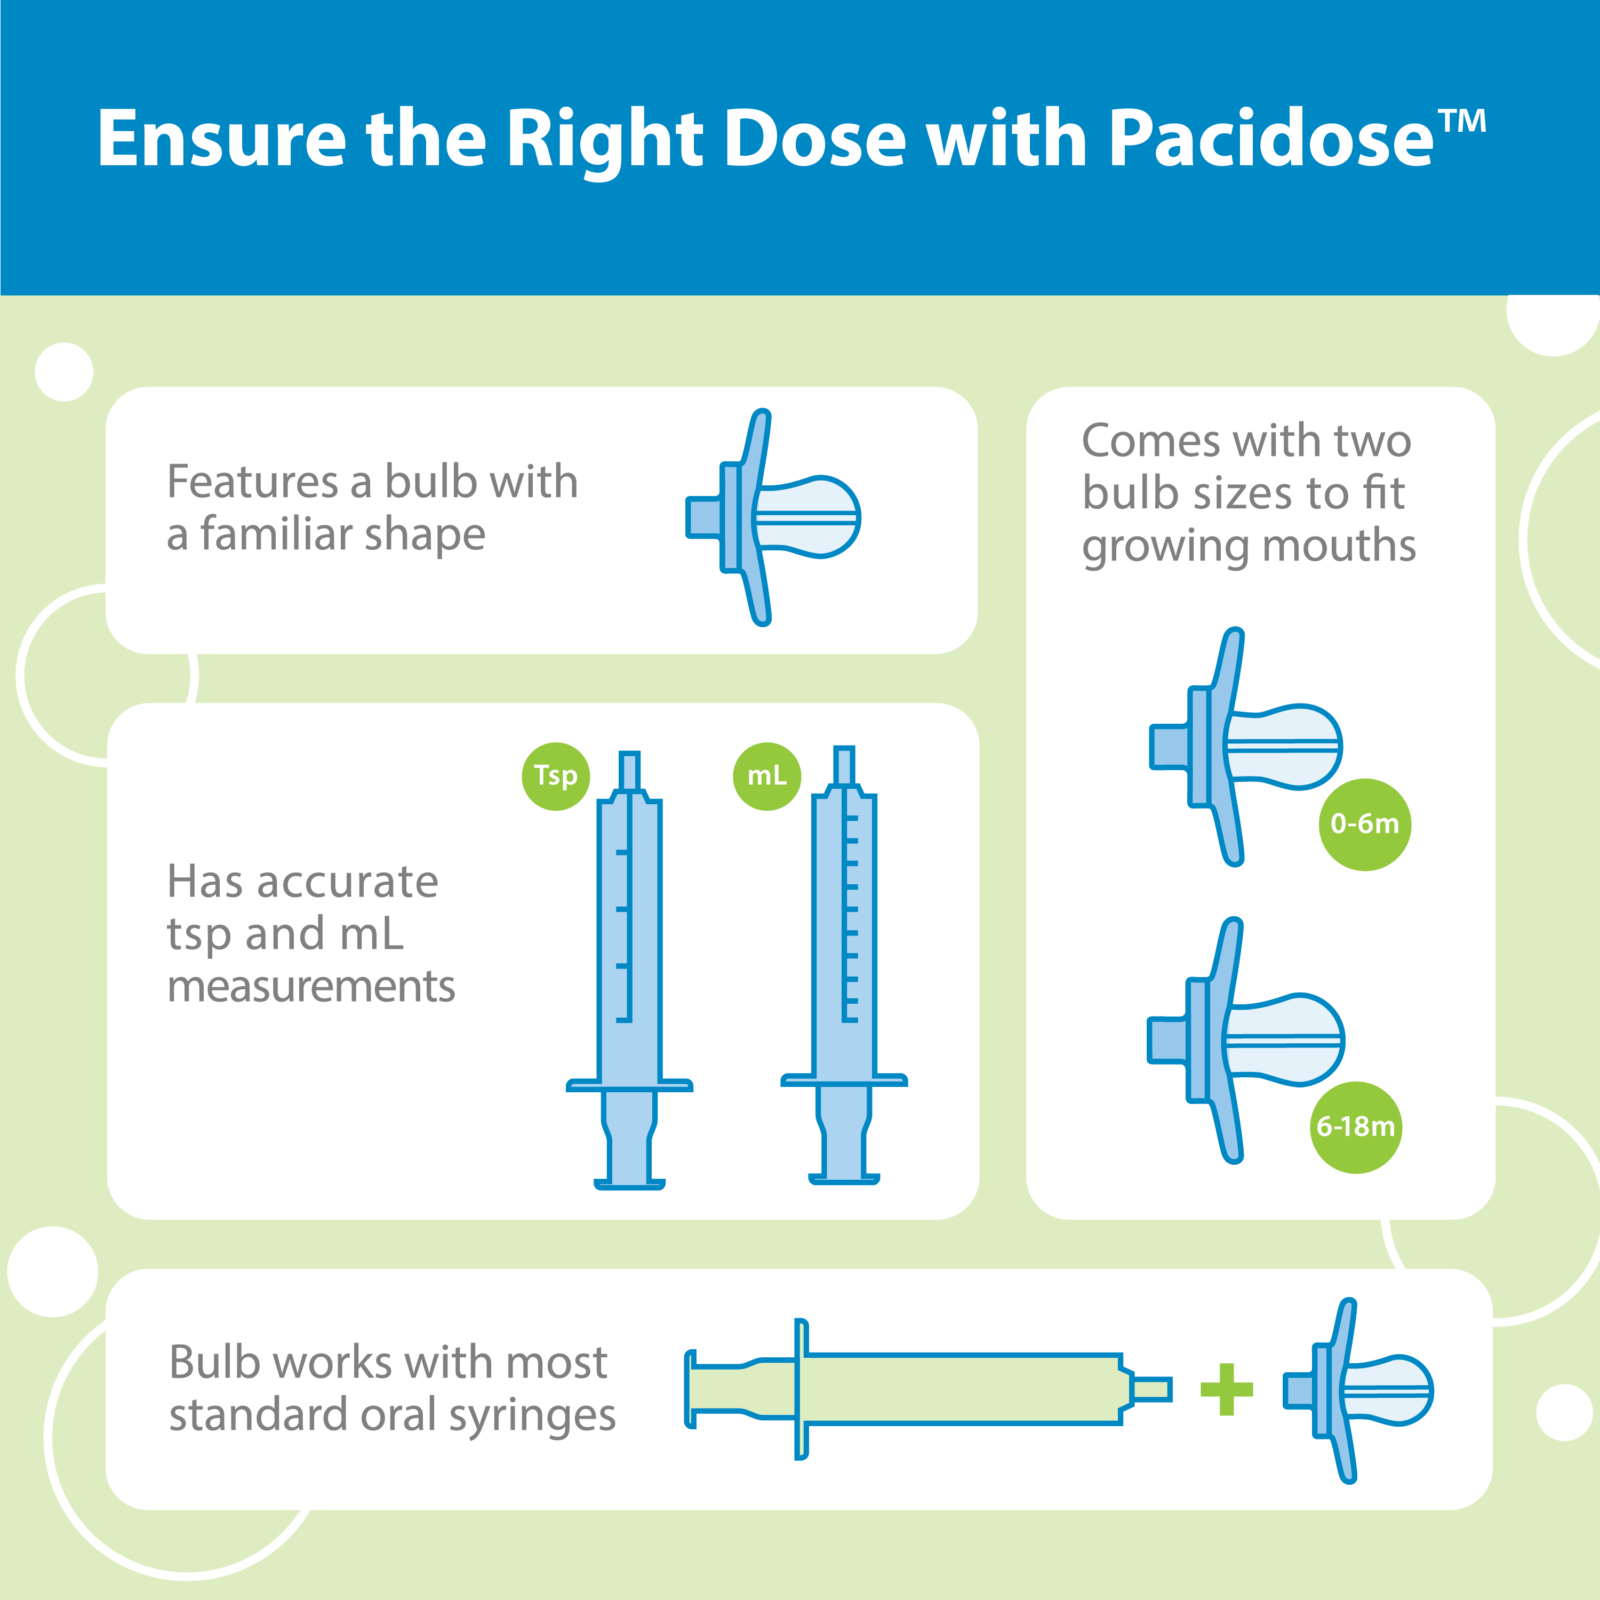 Ensure the Right Dose with Pacidose Features a bulb with a familiar shape. Comes with two bulb sizes to fit growing mouths. Has accurate tsp and mL measurements. Bulb works with most standard oral syringes.